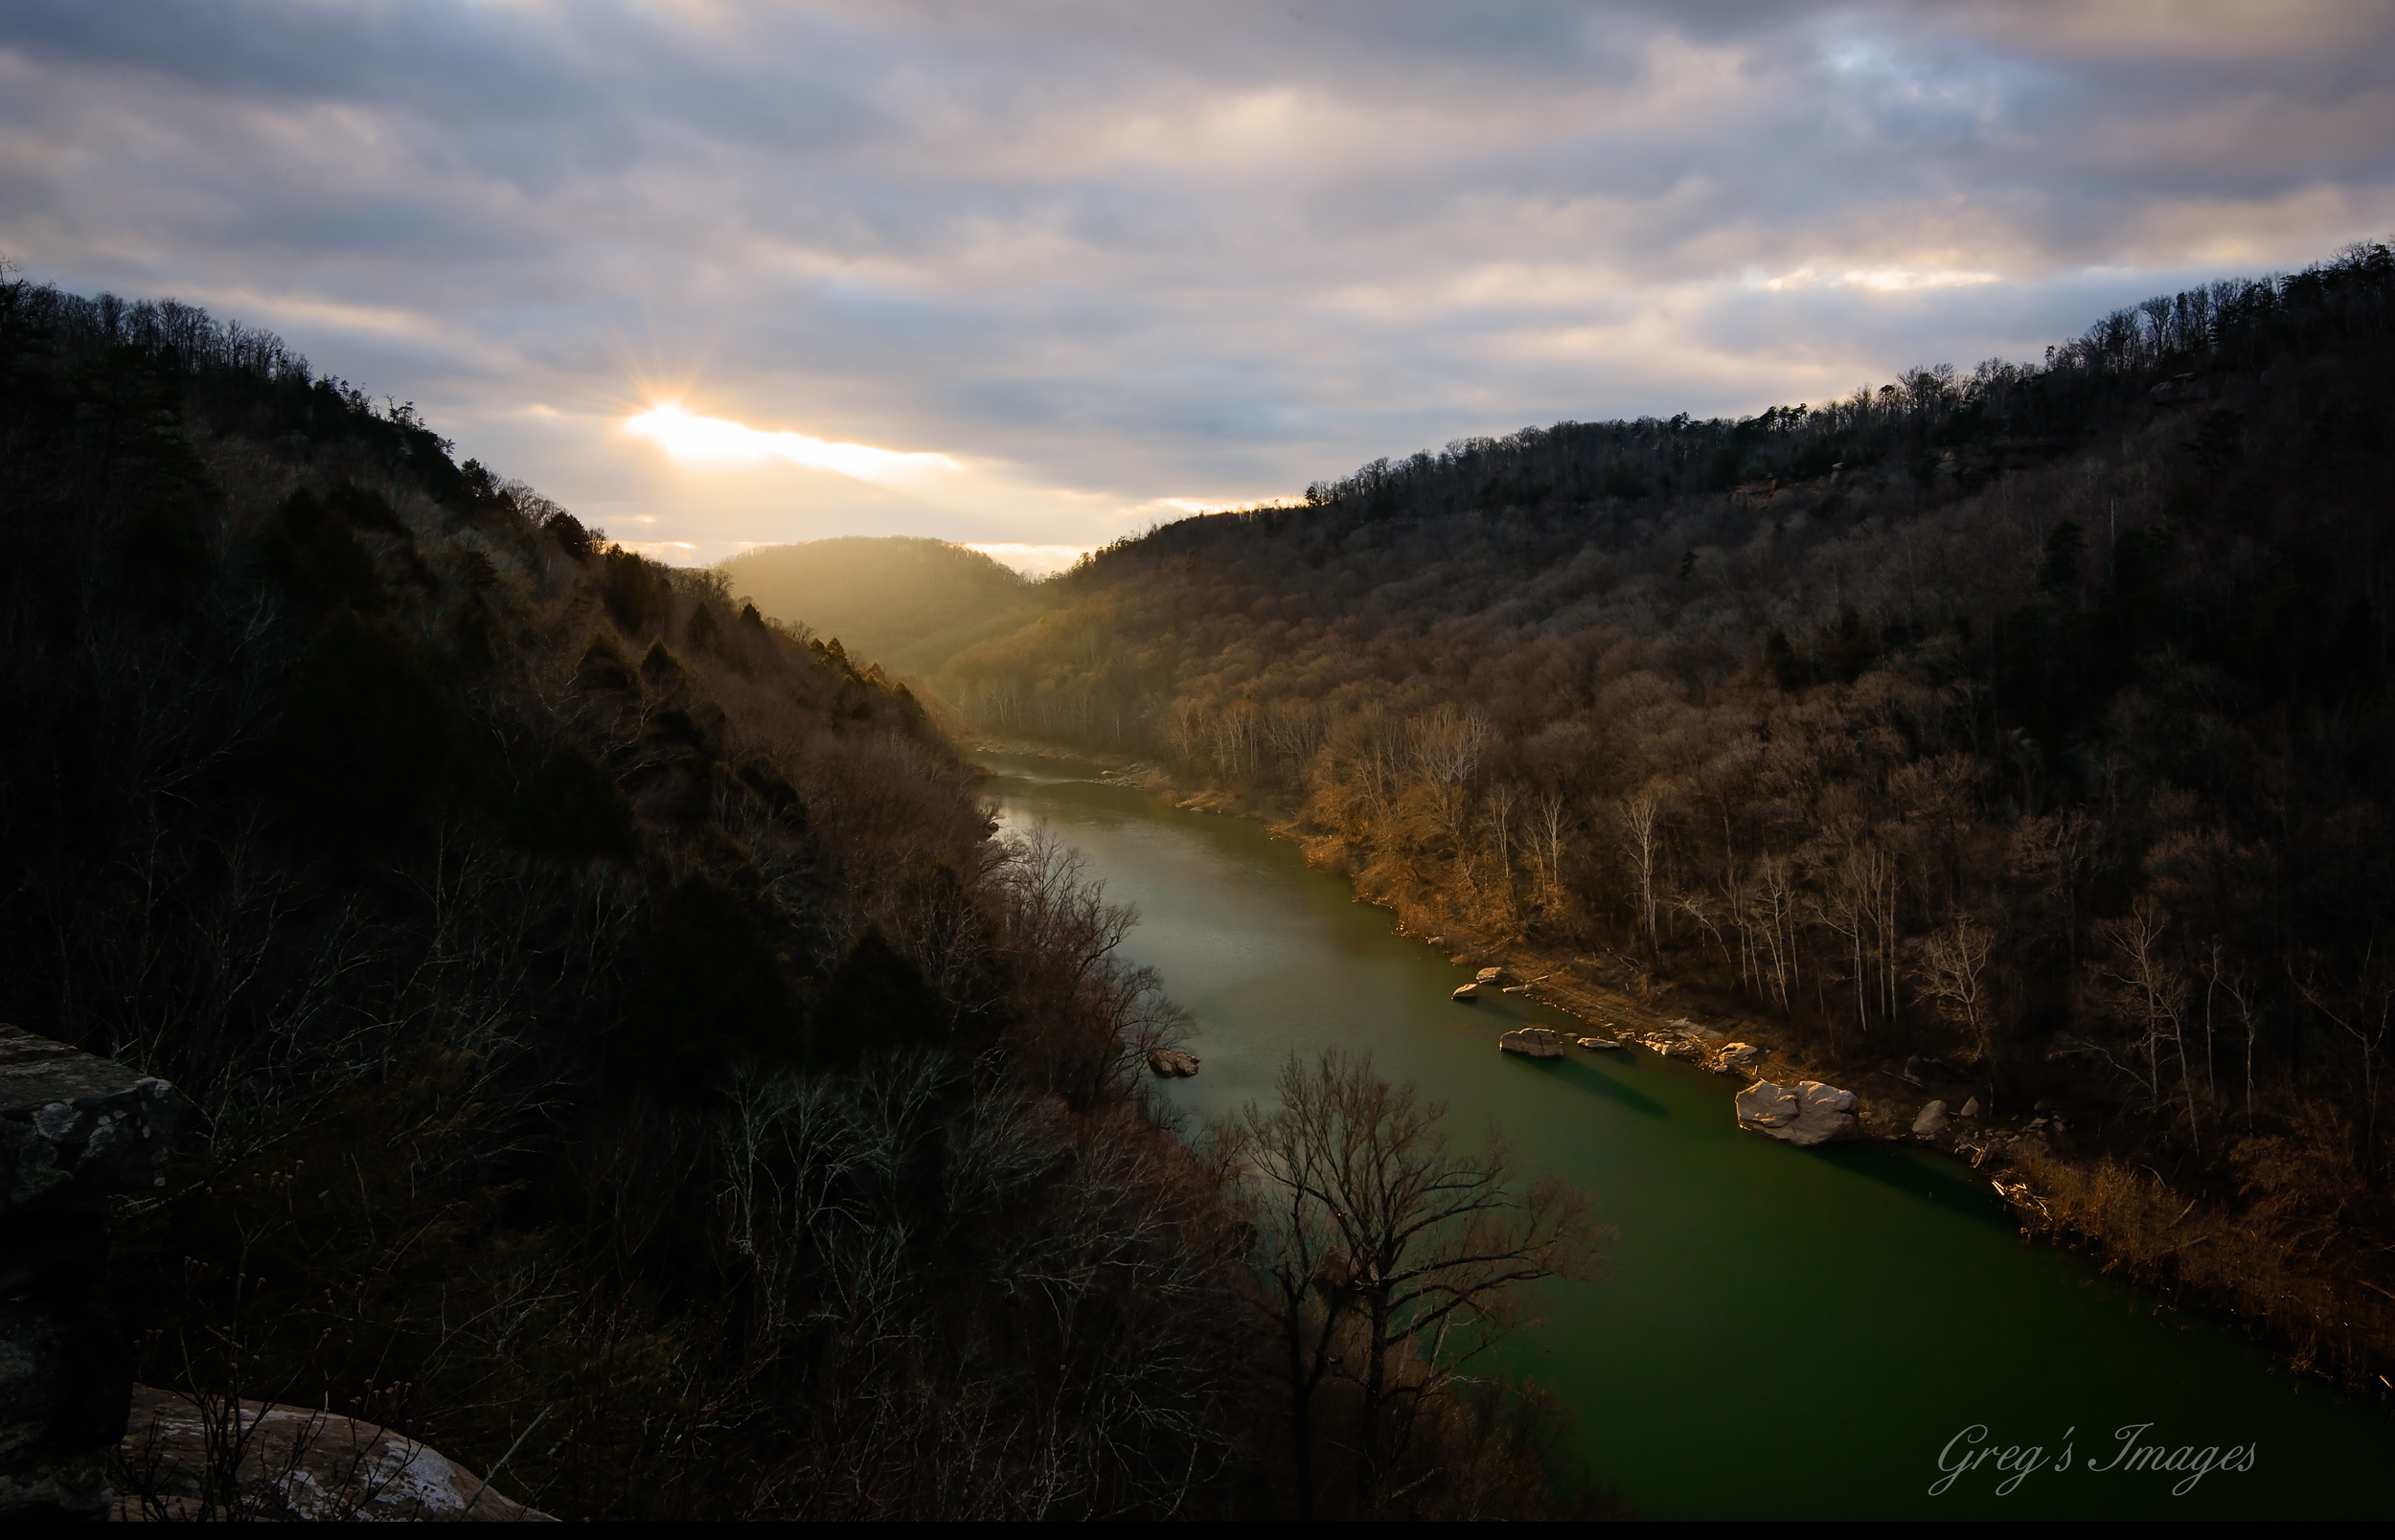 The evening sun breaking through the clouds and illuminating the South Fork River.